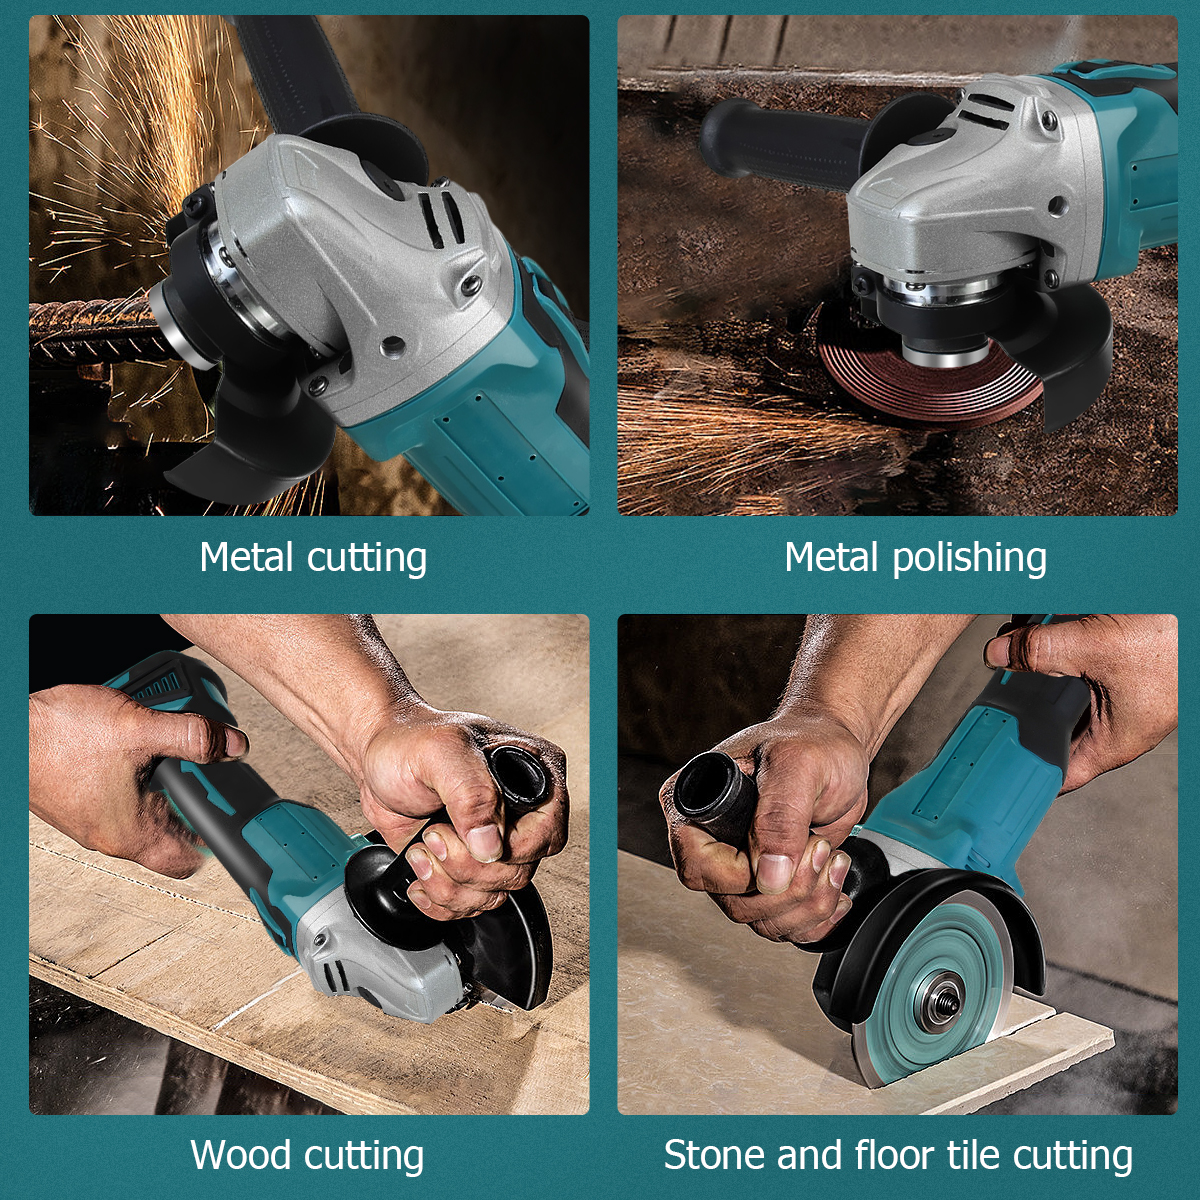 BLMIATKO-18V-860W-4-Speed-Regulated-Cordless-Brushless-Angle-Grinder-For-Makita-Battery-Electric-Gri-1715153-10